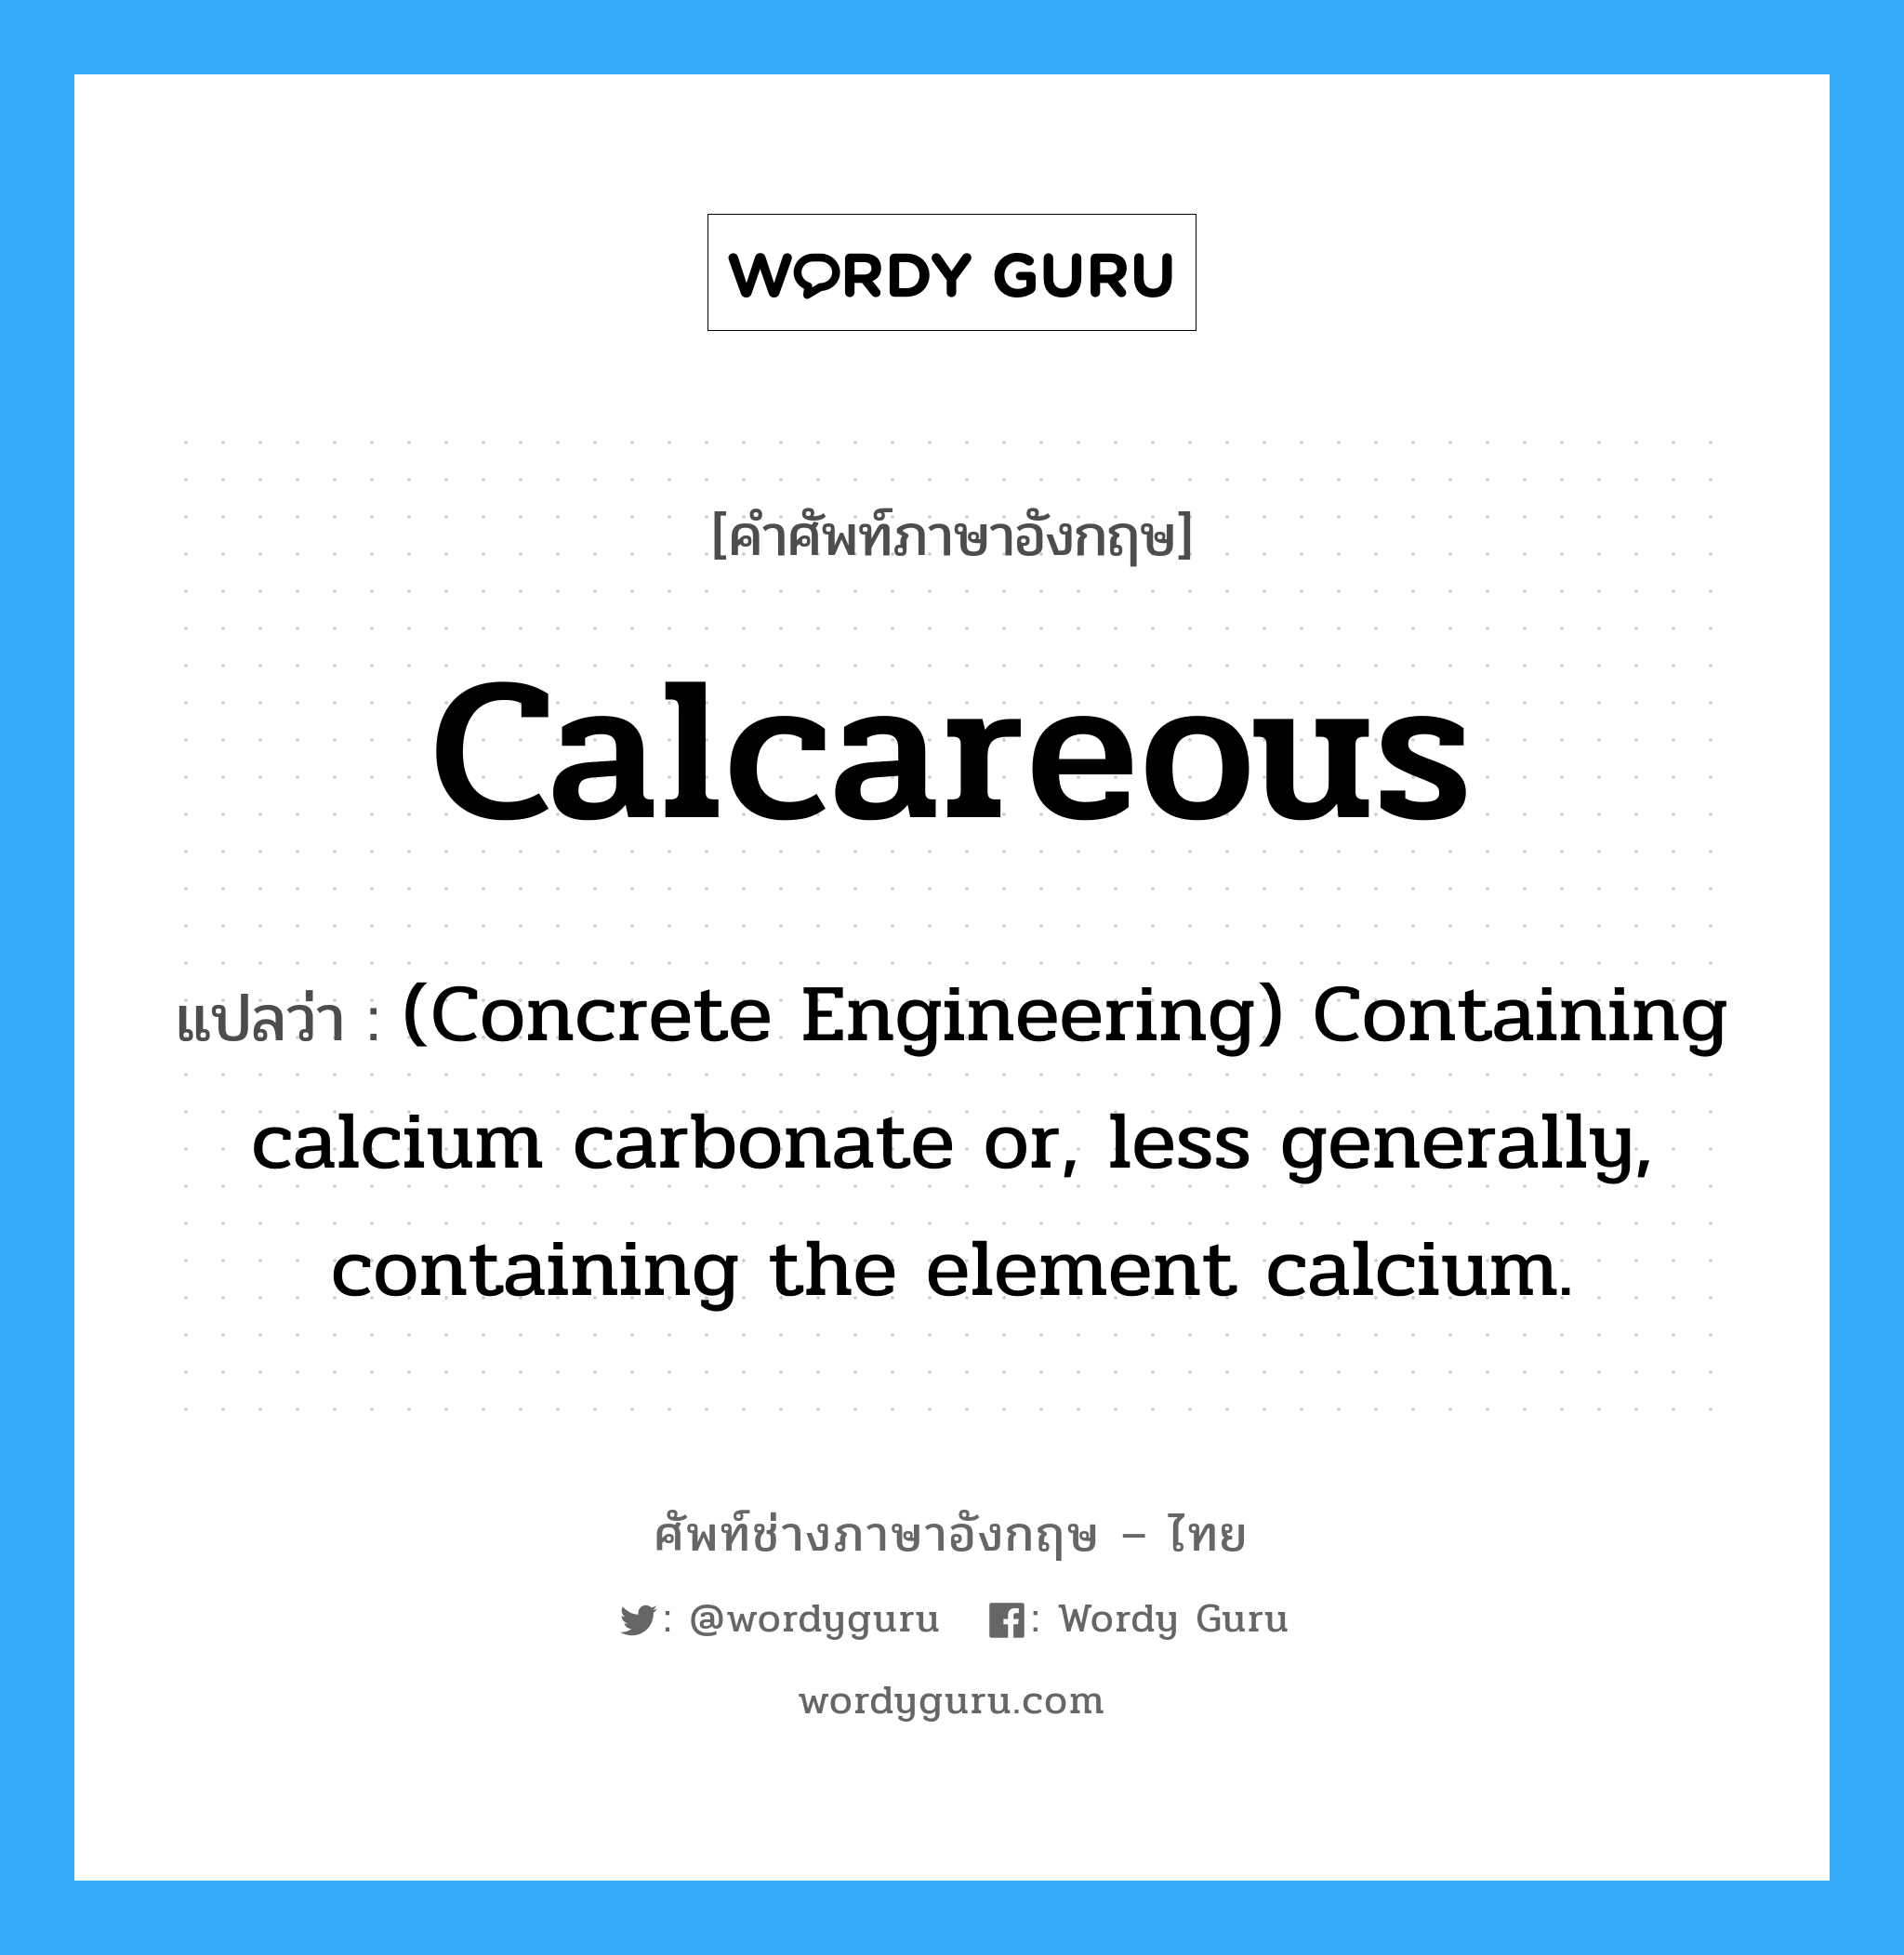 (Concrete Engineering) Containing calcium carbonate or, less generally, containing the element calcium. ภาษาอังกฤษ?, คำศัพท์ช่างภาษาอังกฤษ - ไทย (Concrete Engineering) Containing calcium carbonate or, less generally, containing the element calcium. คำศัพท์ภาษาอังกฤษ (Concrete Engineering) Containing calcium carbonate or, less generally, containing the element calcium. แปลว่า Calcareous